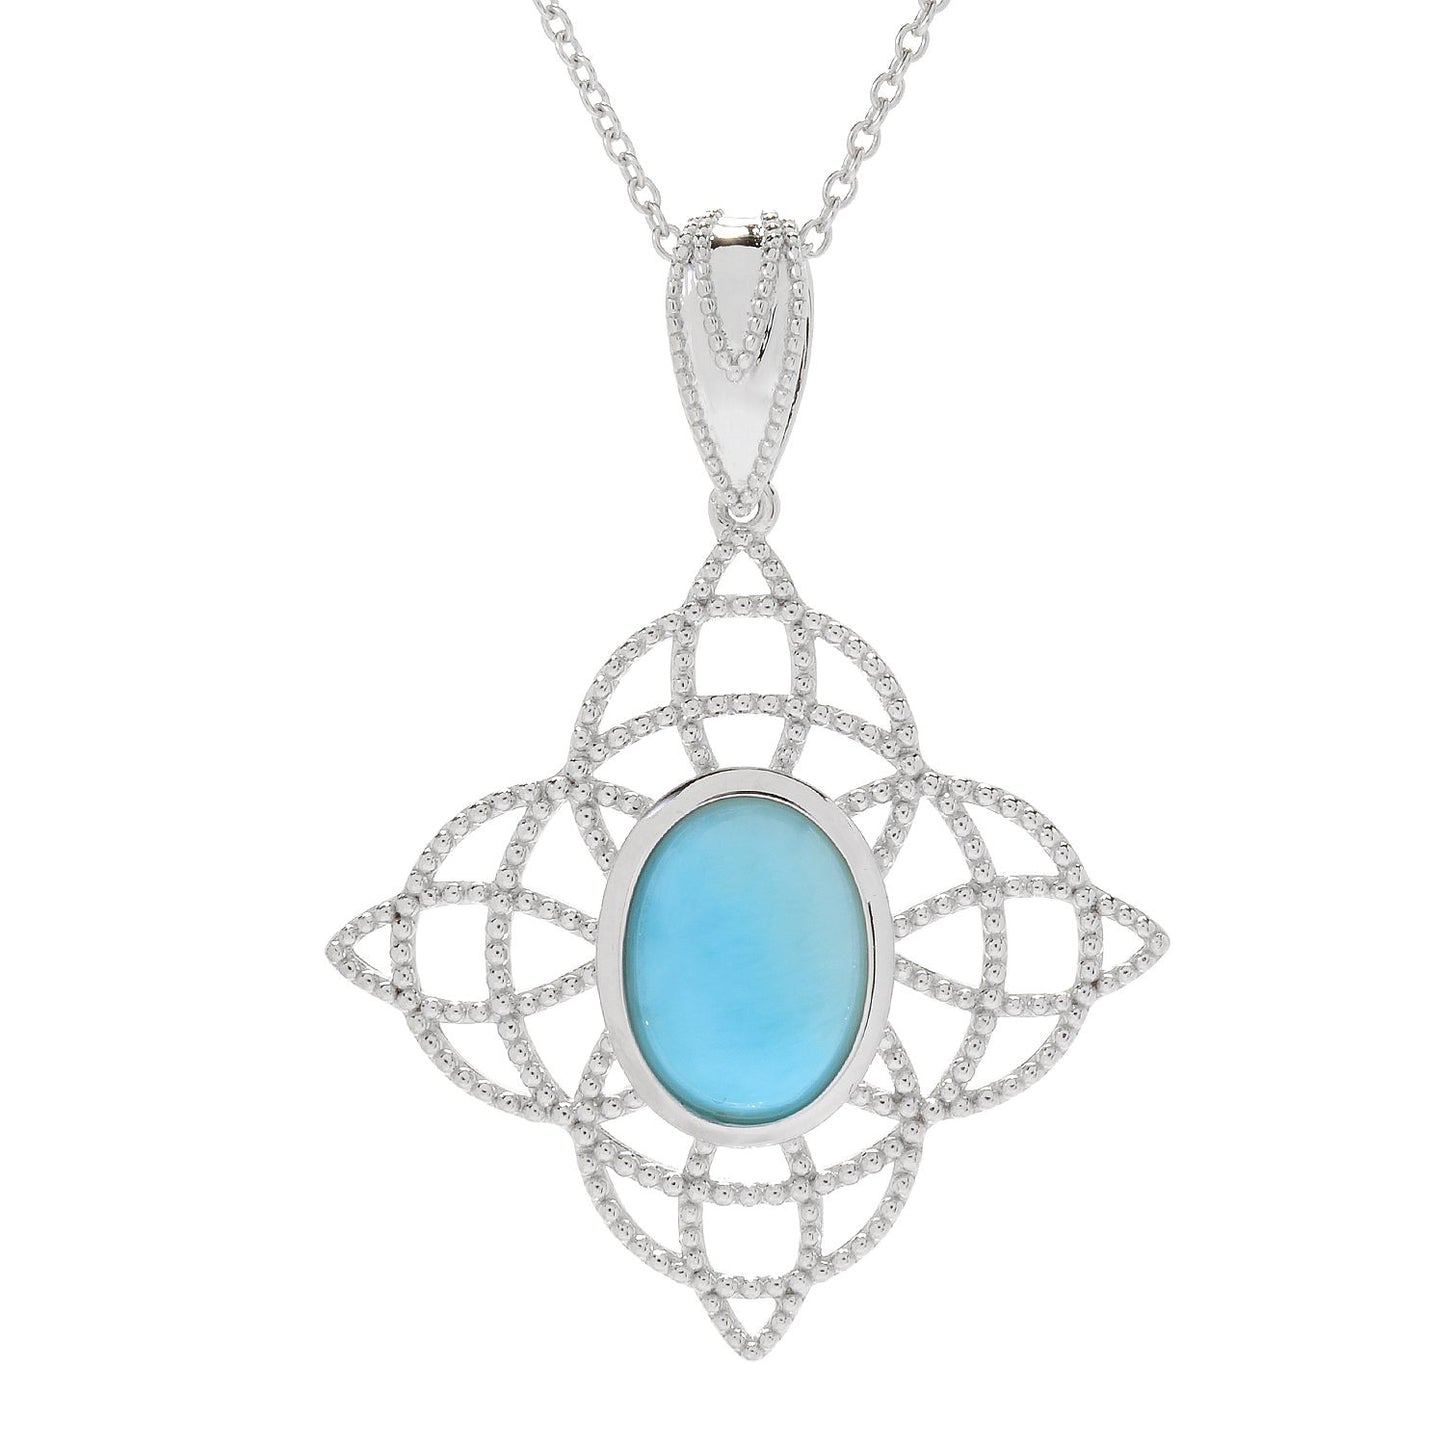 Pinctore Sterling Silver 14 x 10mm Oval Larimar Beaded Pendant w/Chain - pinctore